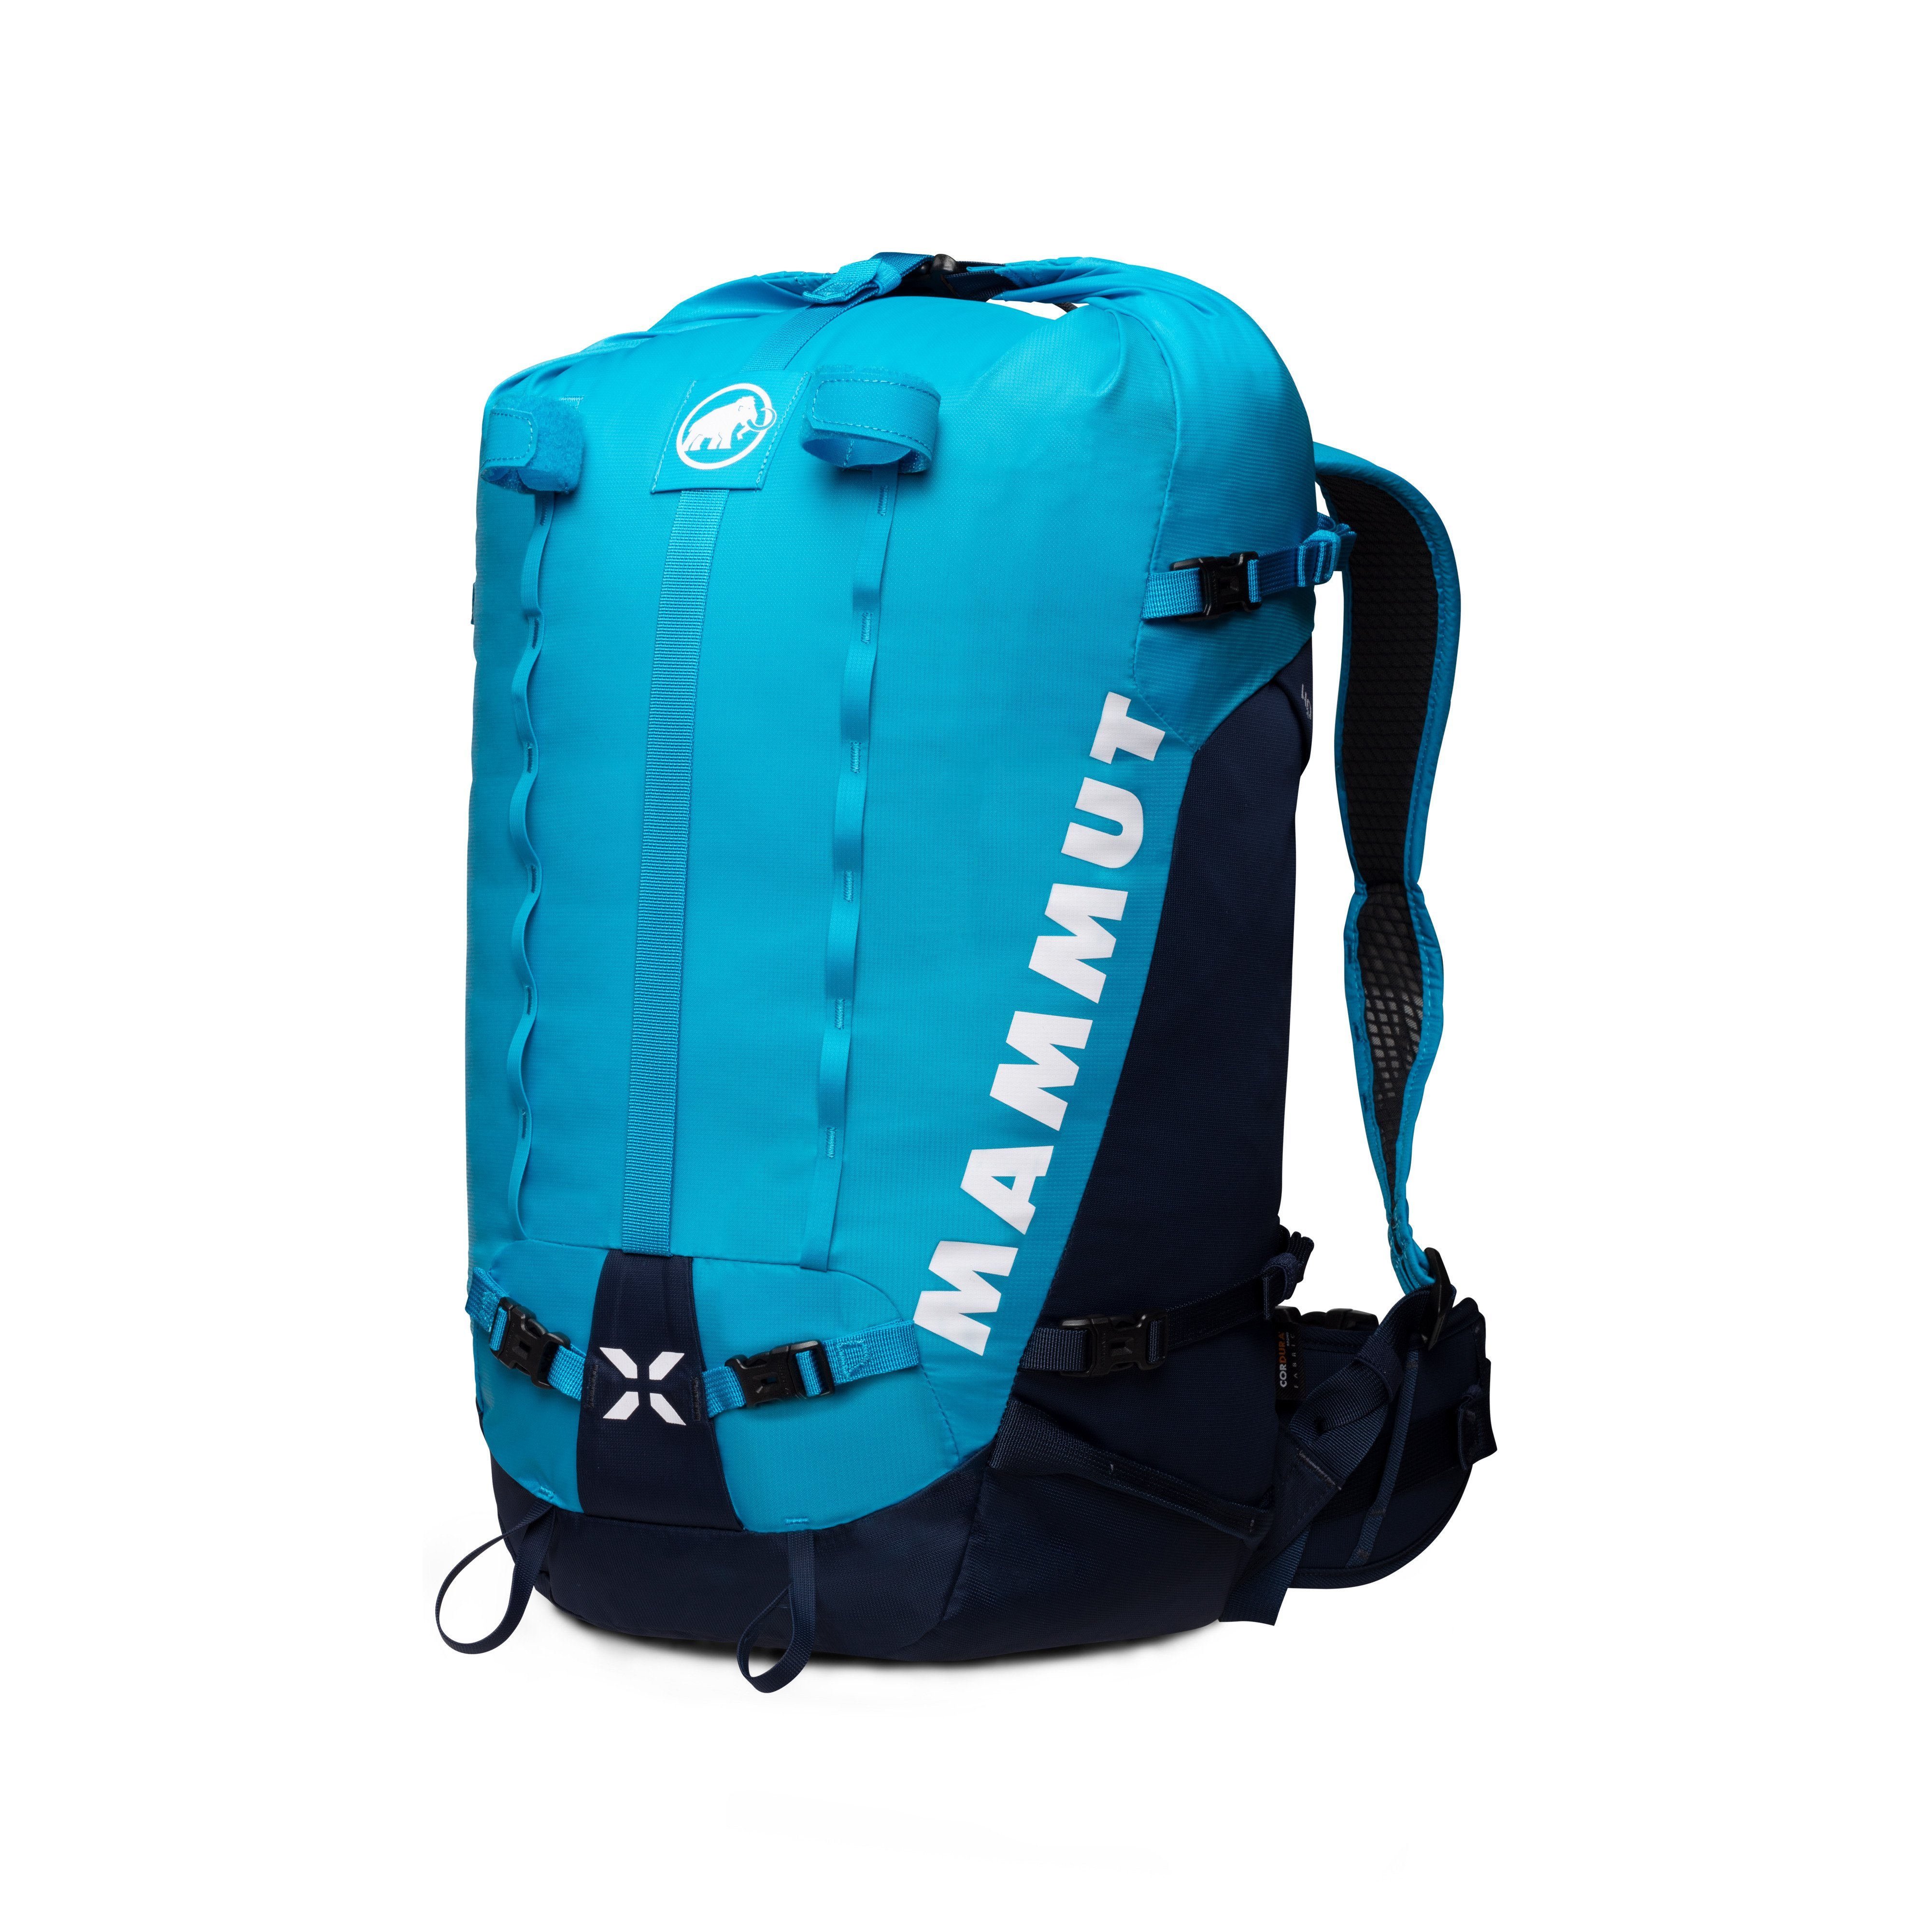 Trion Nordwand 28 Women - sky-night, 28 L product image